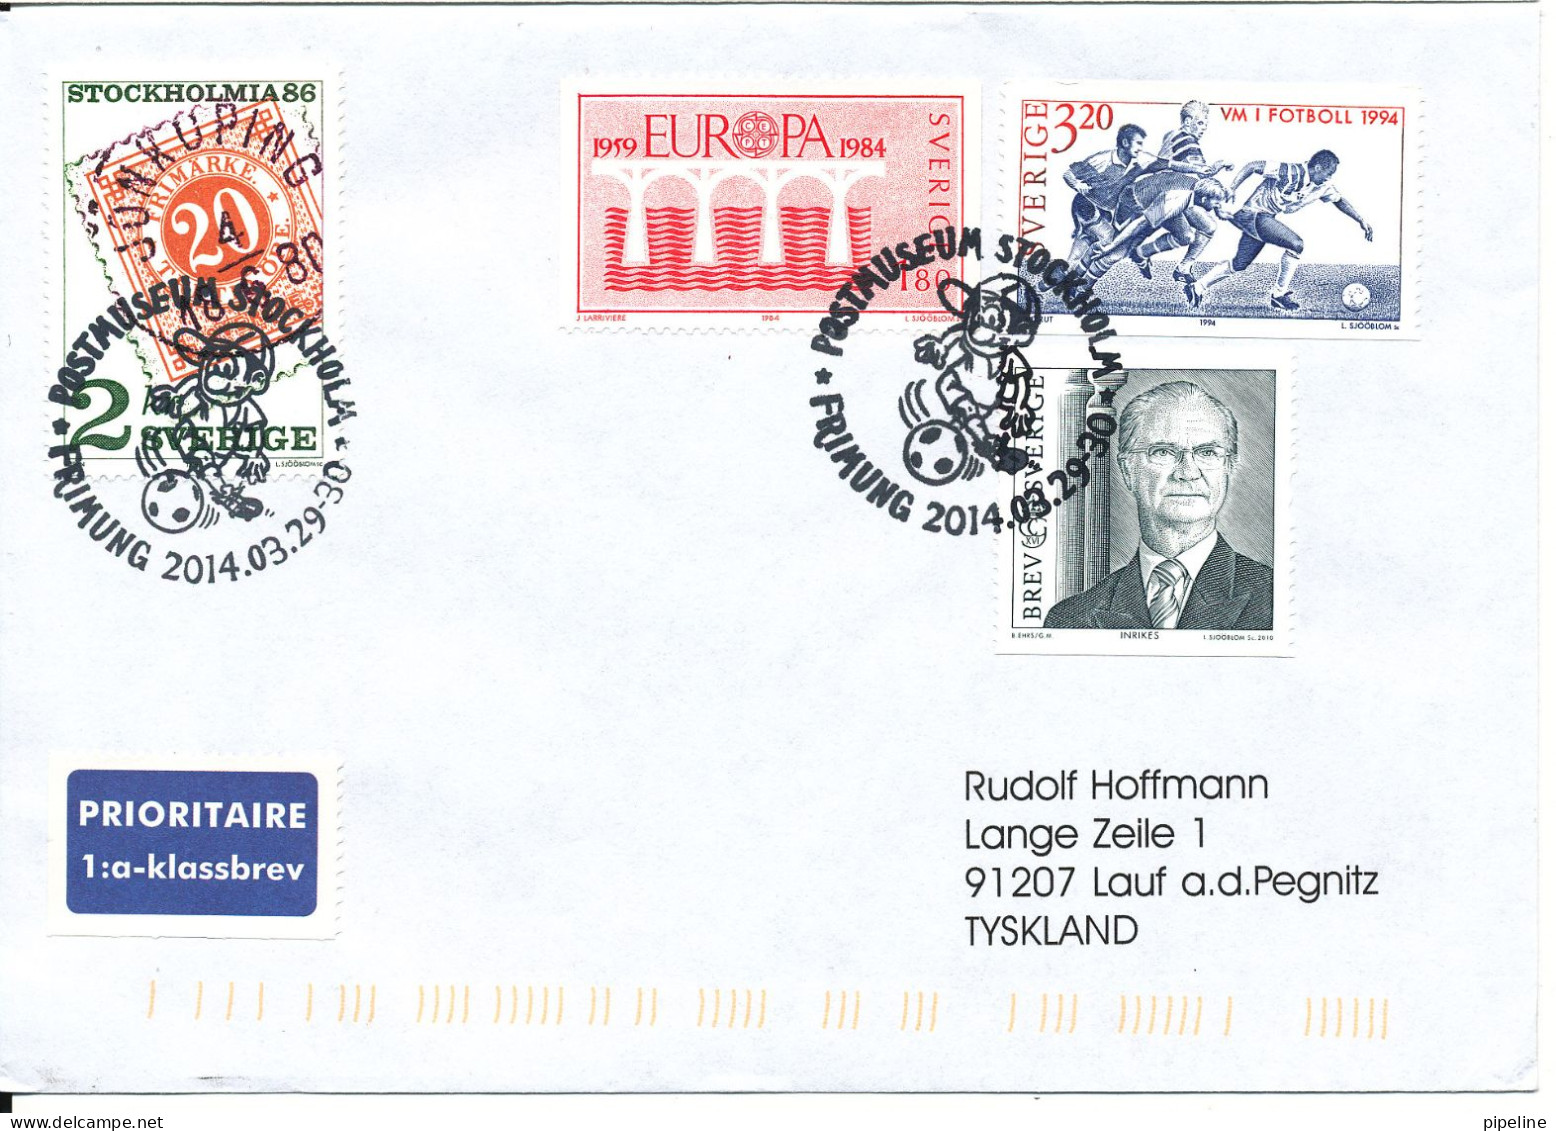 Sweden Cover With Special Postmark Stockholm Postmuseum Frimung 29-30/3-2014 Sent To Germany - Covers & Documents